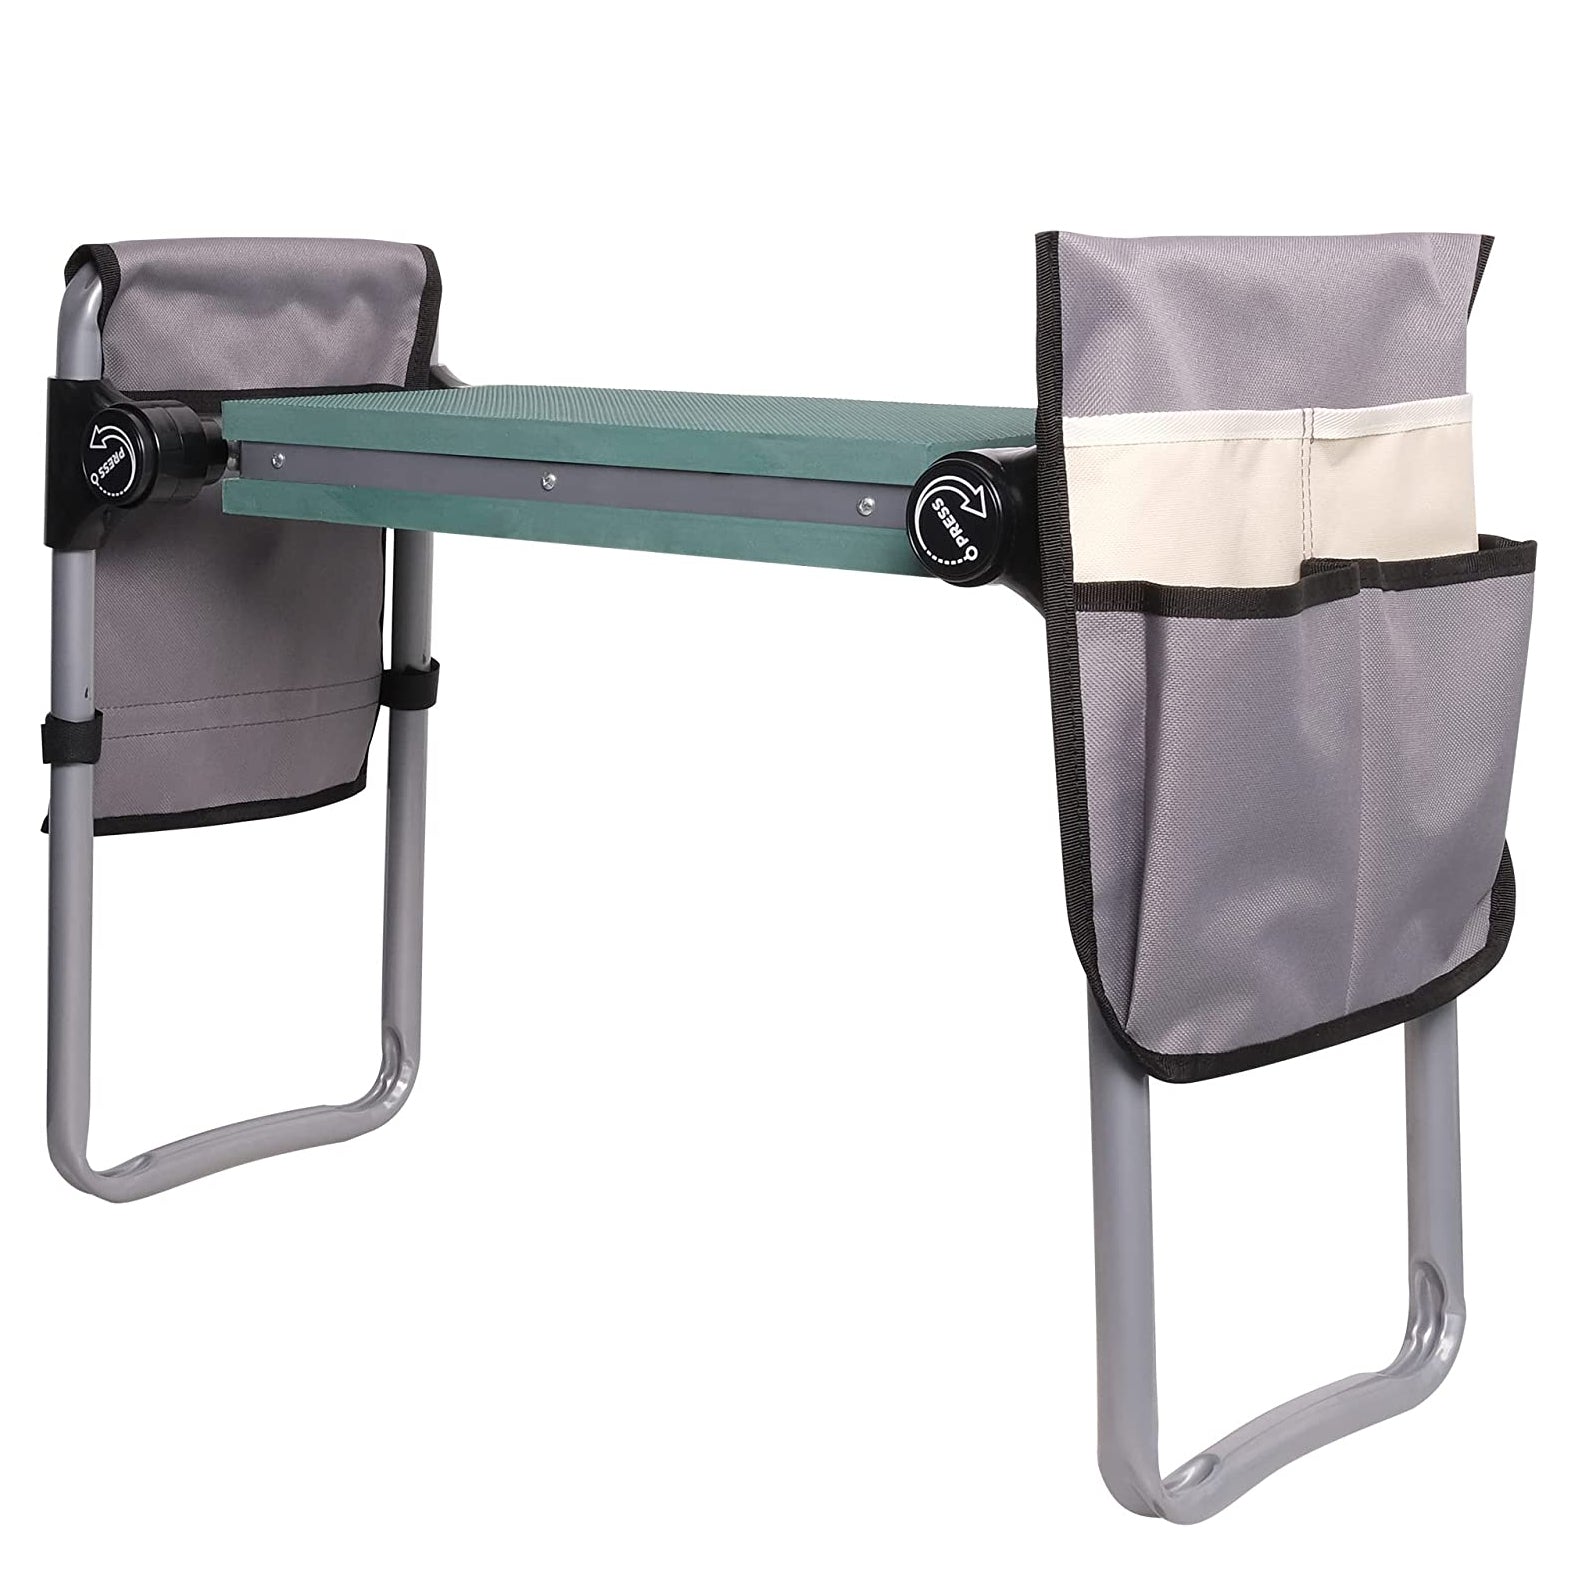 Outdoor 2-in-1 Garden Stool and Kneeler Gardening Bench for Kneeling or Sitting with Tool Bag Pouch Foldable Garden Bench